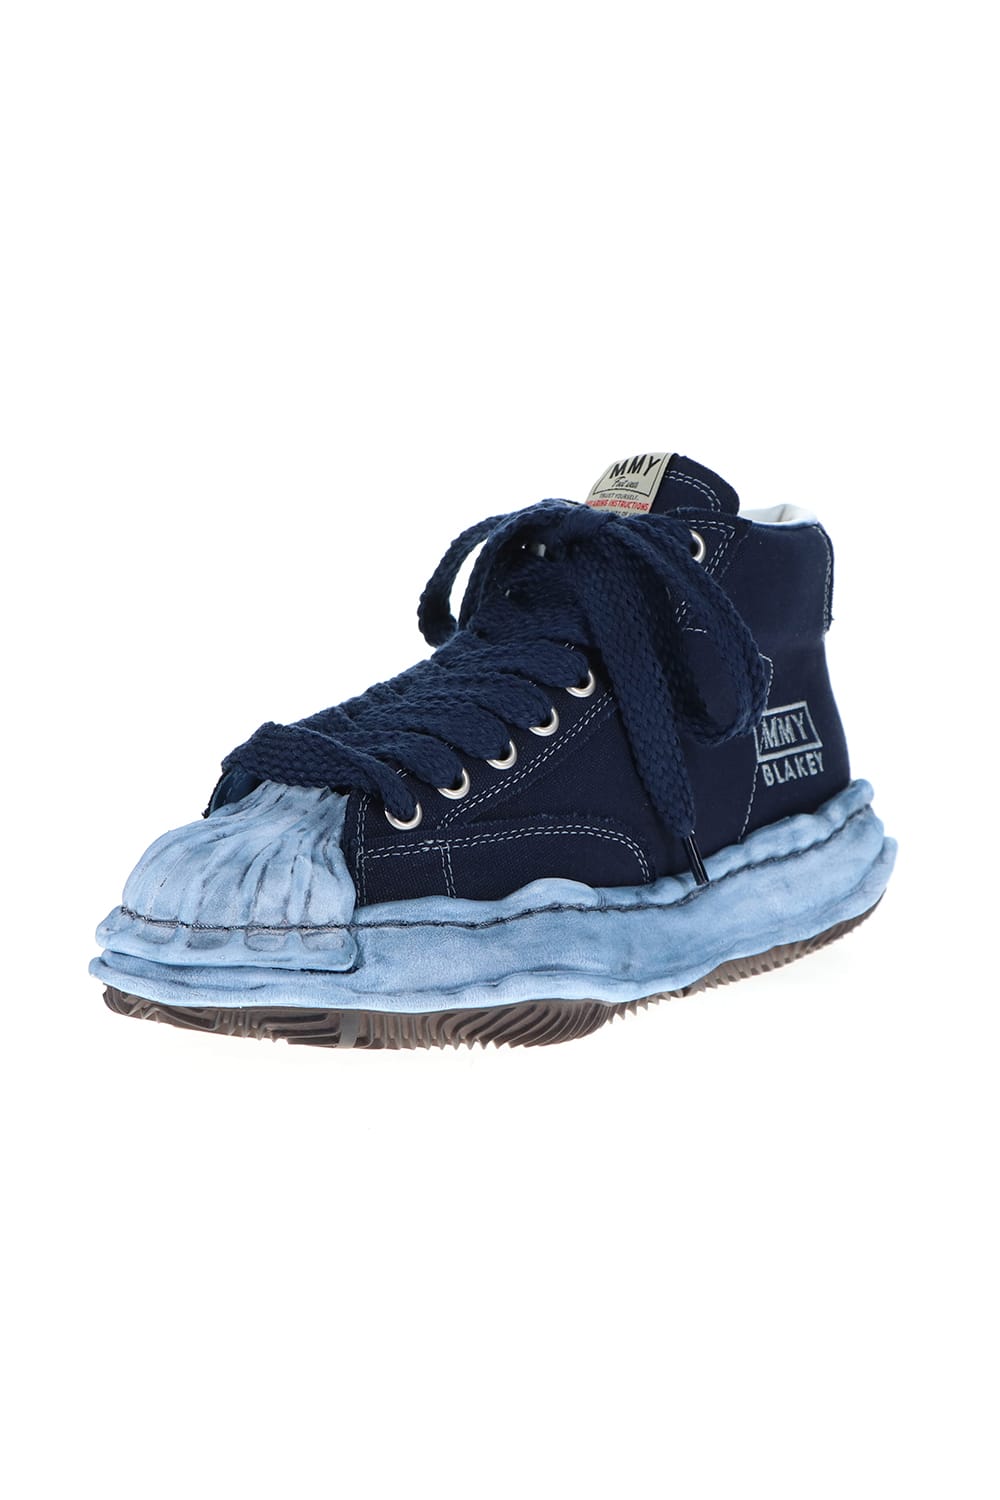 -BLAKEY High- Original STC sole over dyed canvas High-Top sneakers Navy